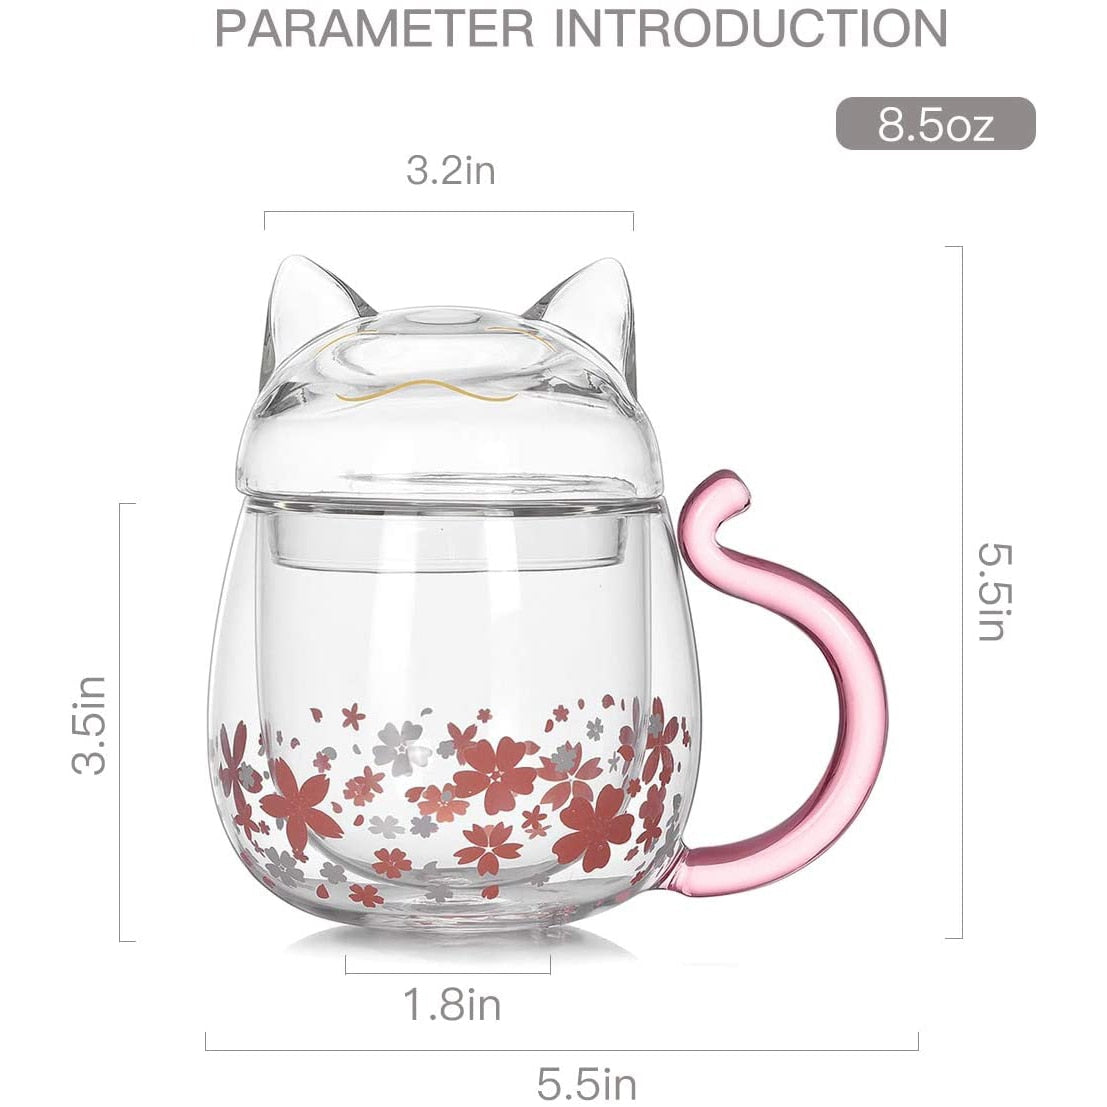 Kawaii Sakura Cat Glass Cup With Lid Dimensions - 3.2" by 5.5"